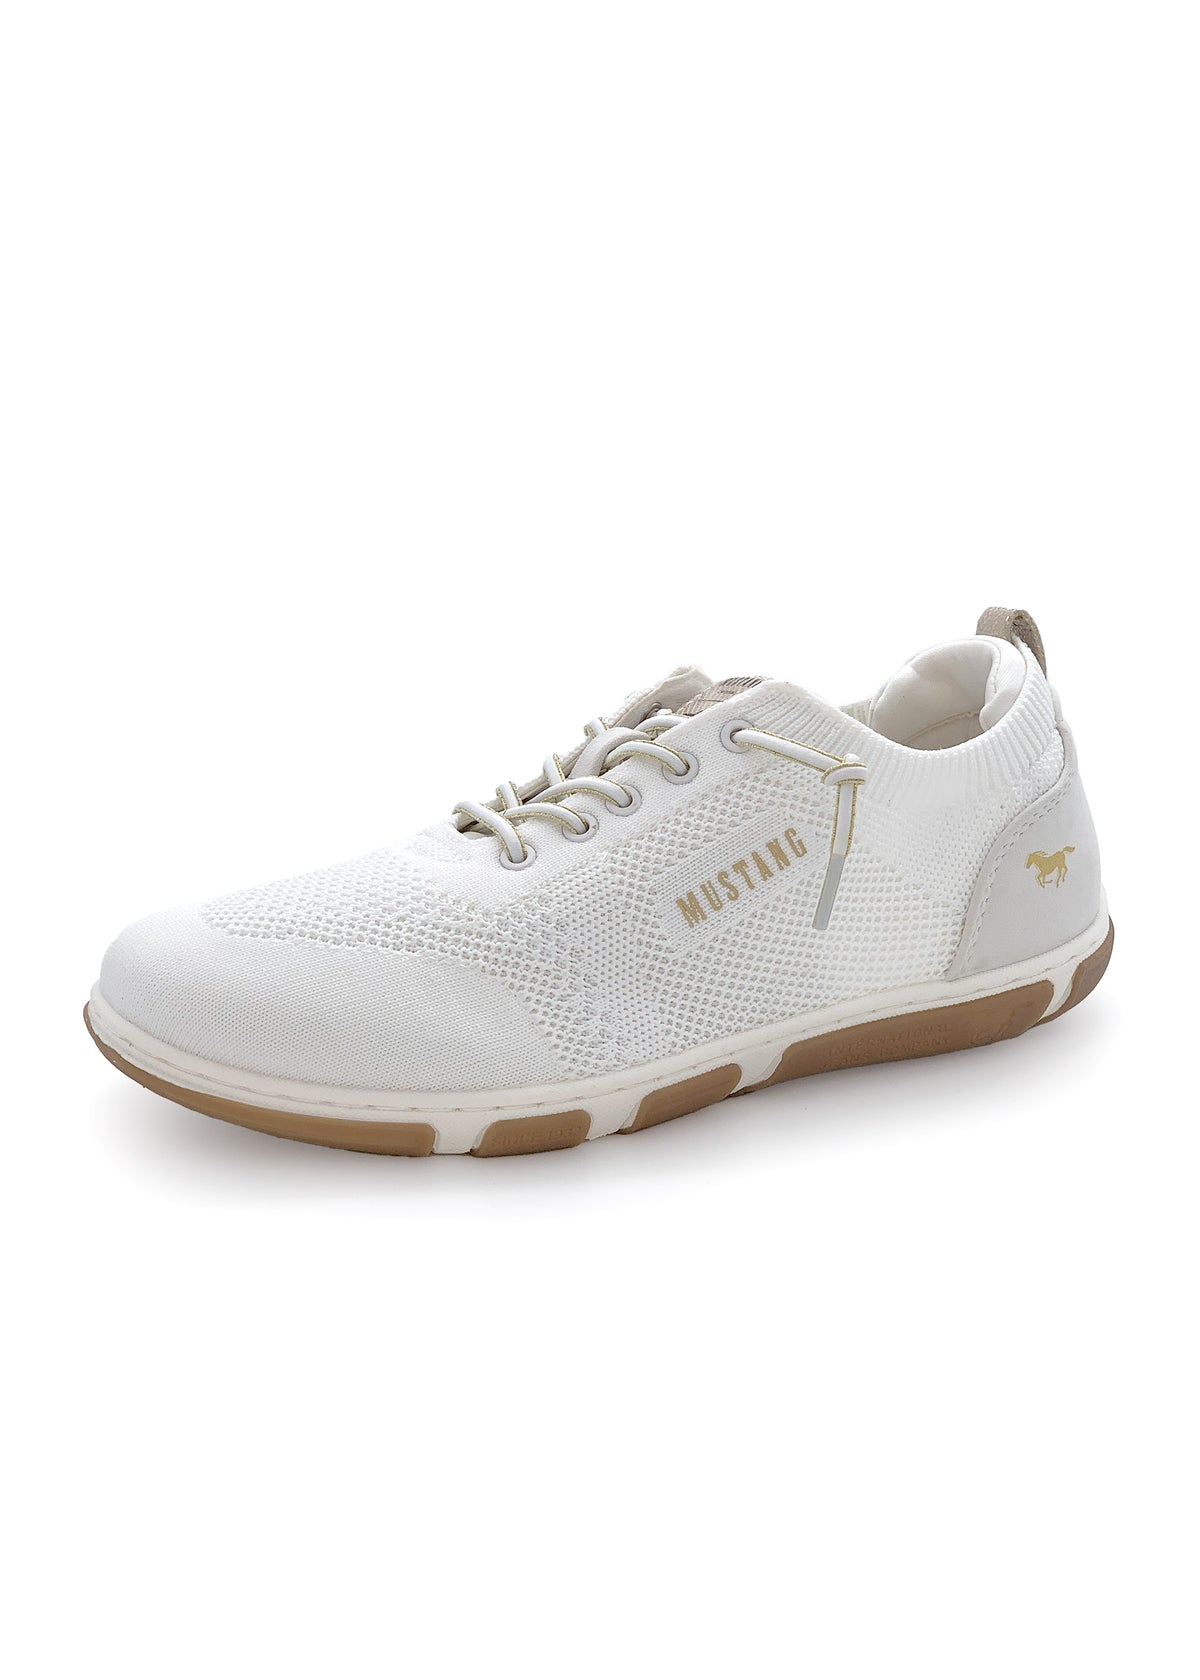 Sneakers with elastic bands - white textile